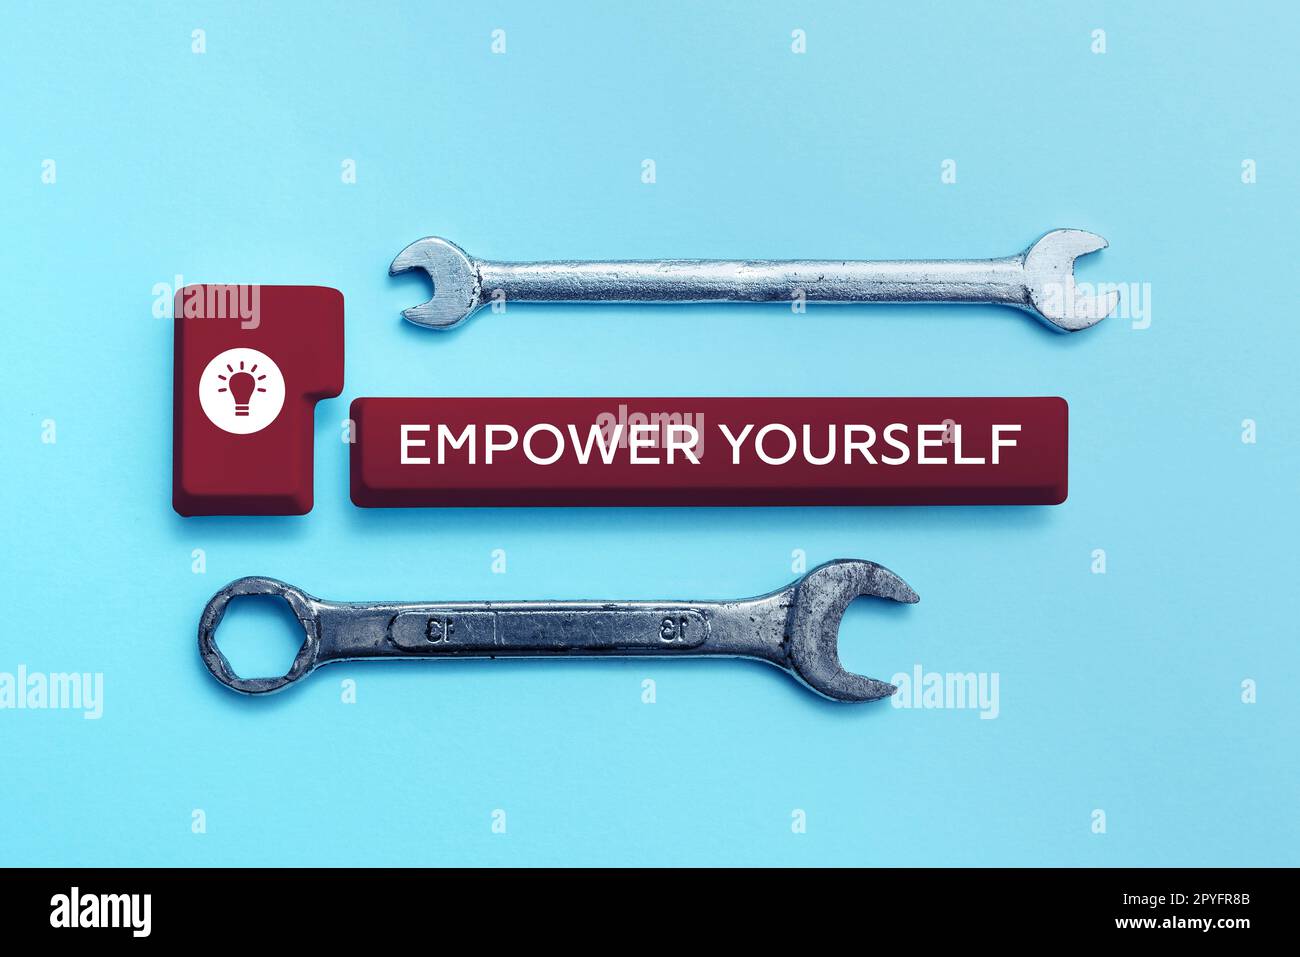 Text caption presenting Empower Yourself. Business showcase taking control of life setting goals positive choices Stock Photo